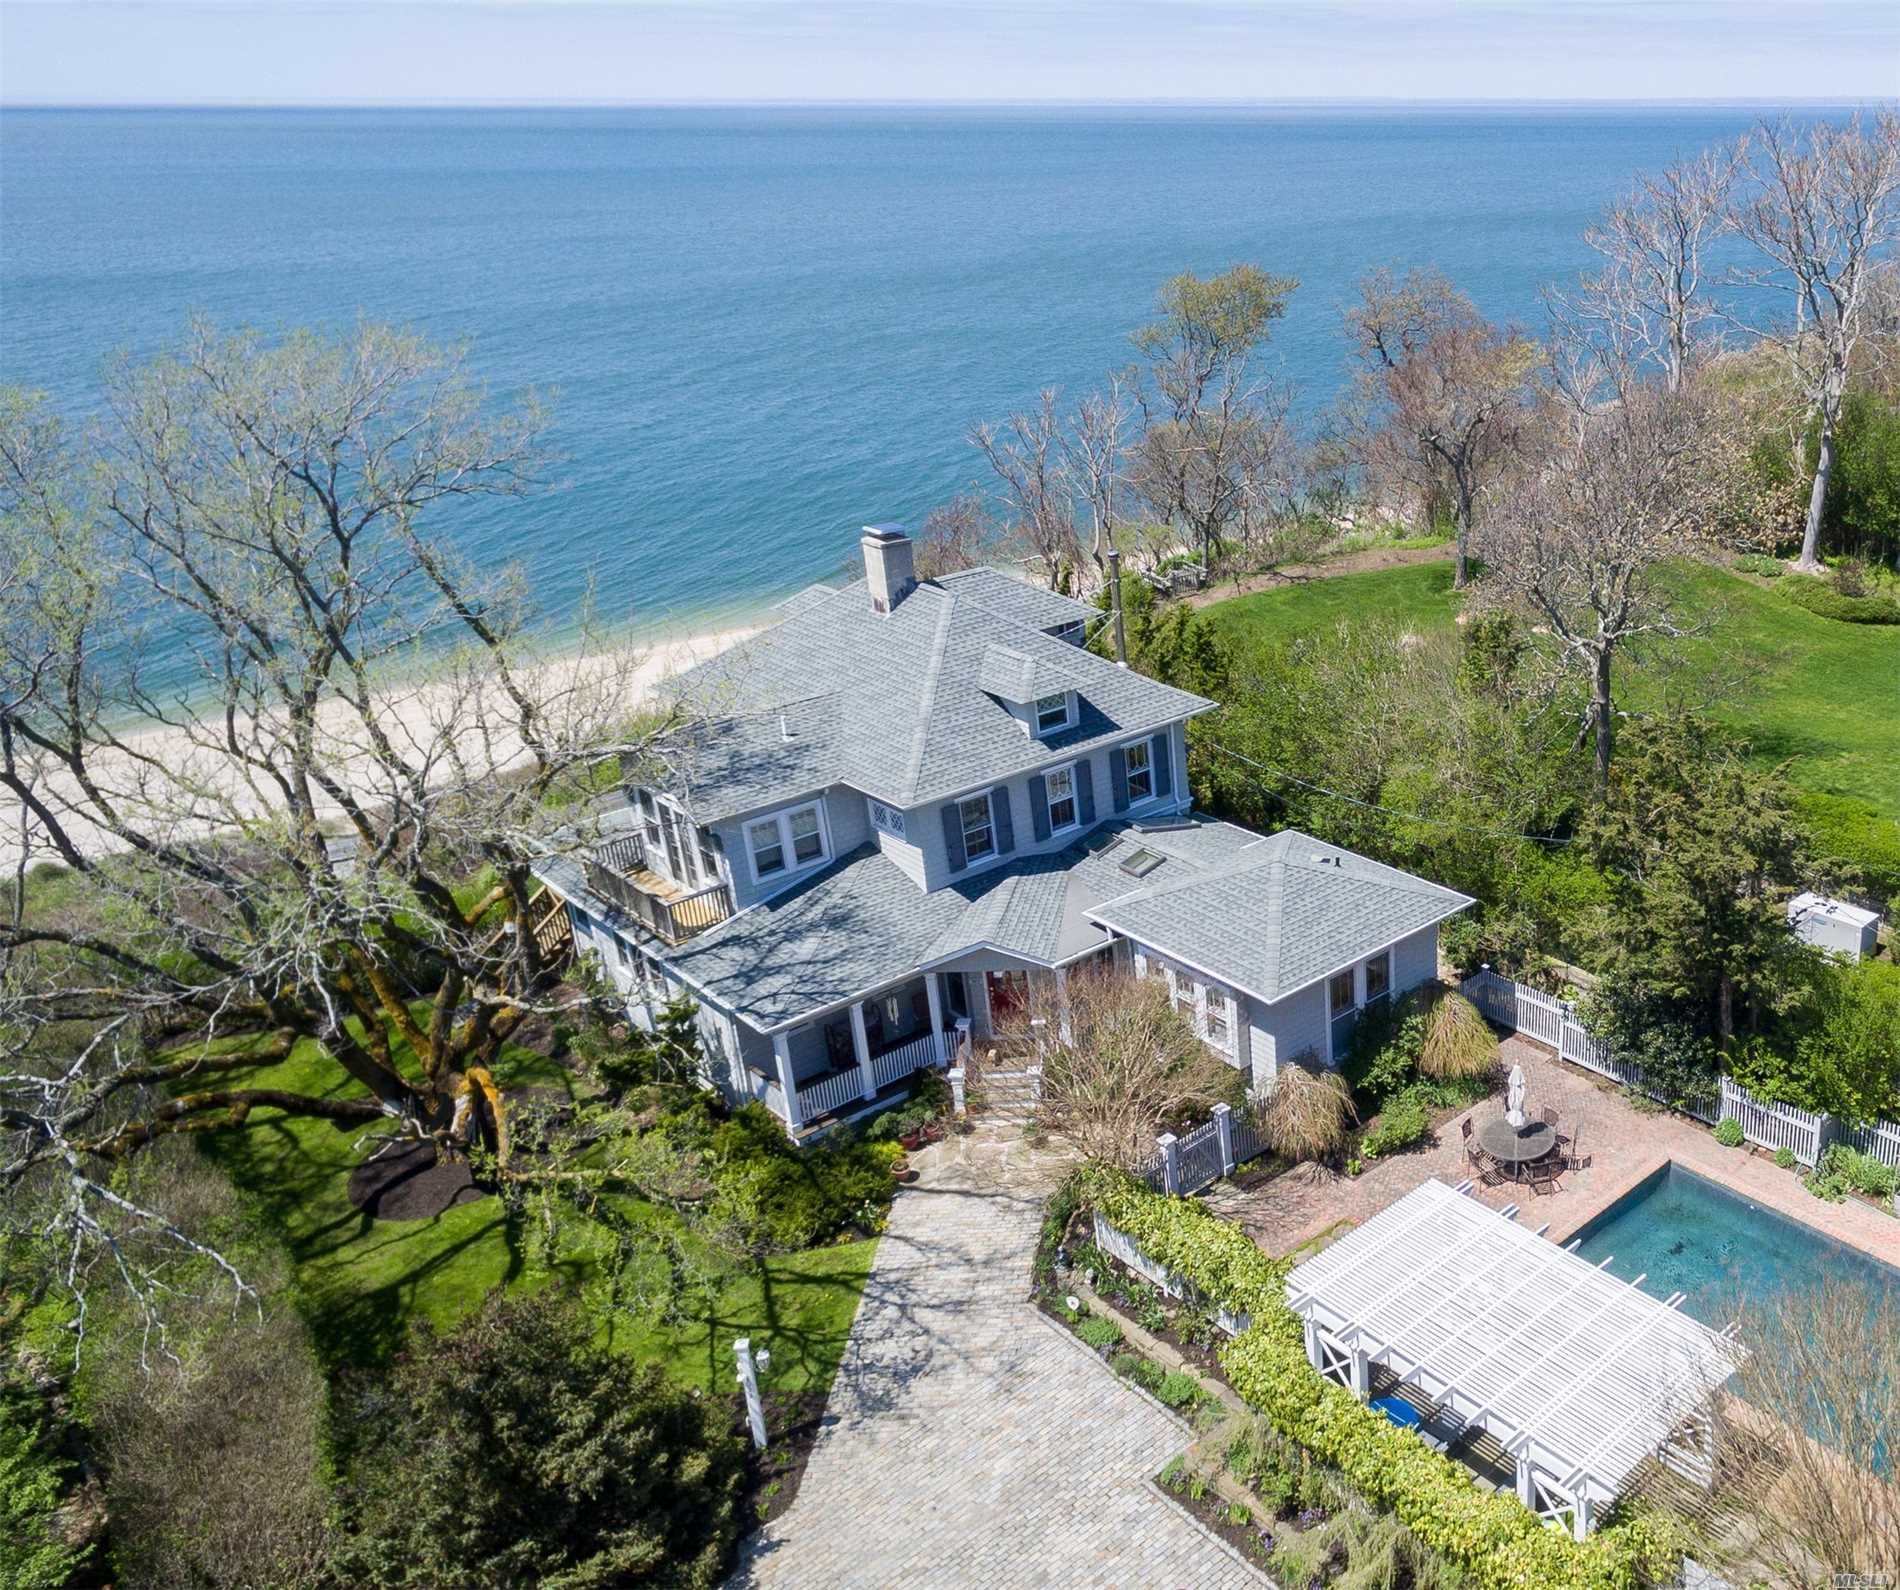 Exquisitely restored mint antique home overlooking LI Sound. Panoramic water views from many rooms, waterside patio, waterside deck, 2nd floor waterside balcony. Large eat-in gourmet kitchen, wood burning fireplace, 2 gas stoves, CAC, updated appliances. Private access to beach, heated gunite pool with pergola covered patio & hot tub. Original leaded glass cabinets and feaures.